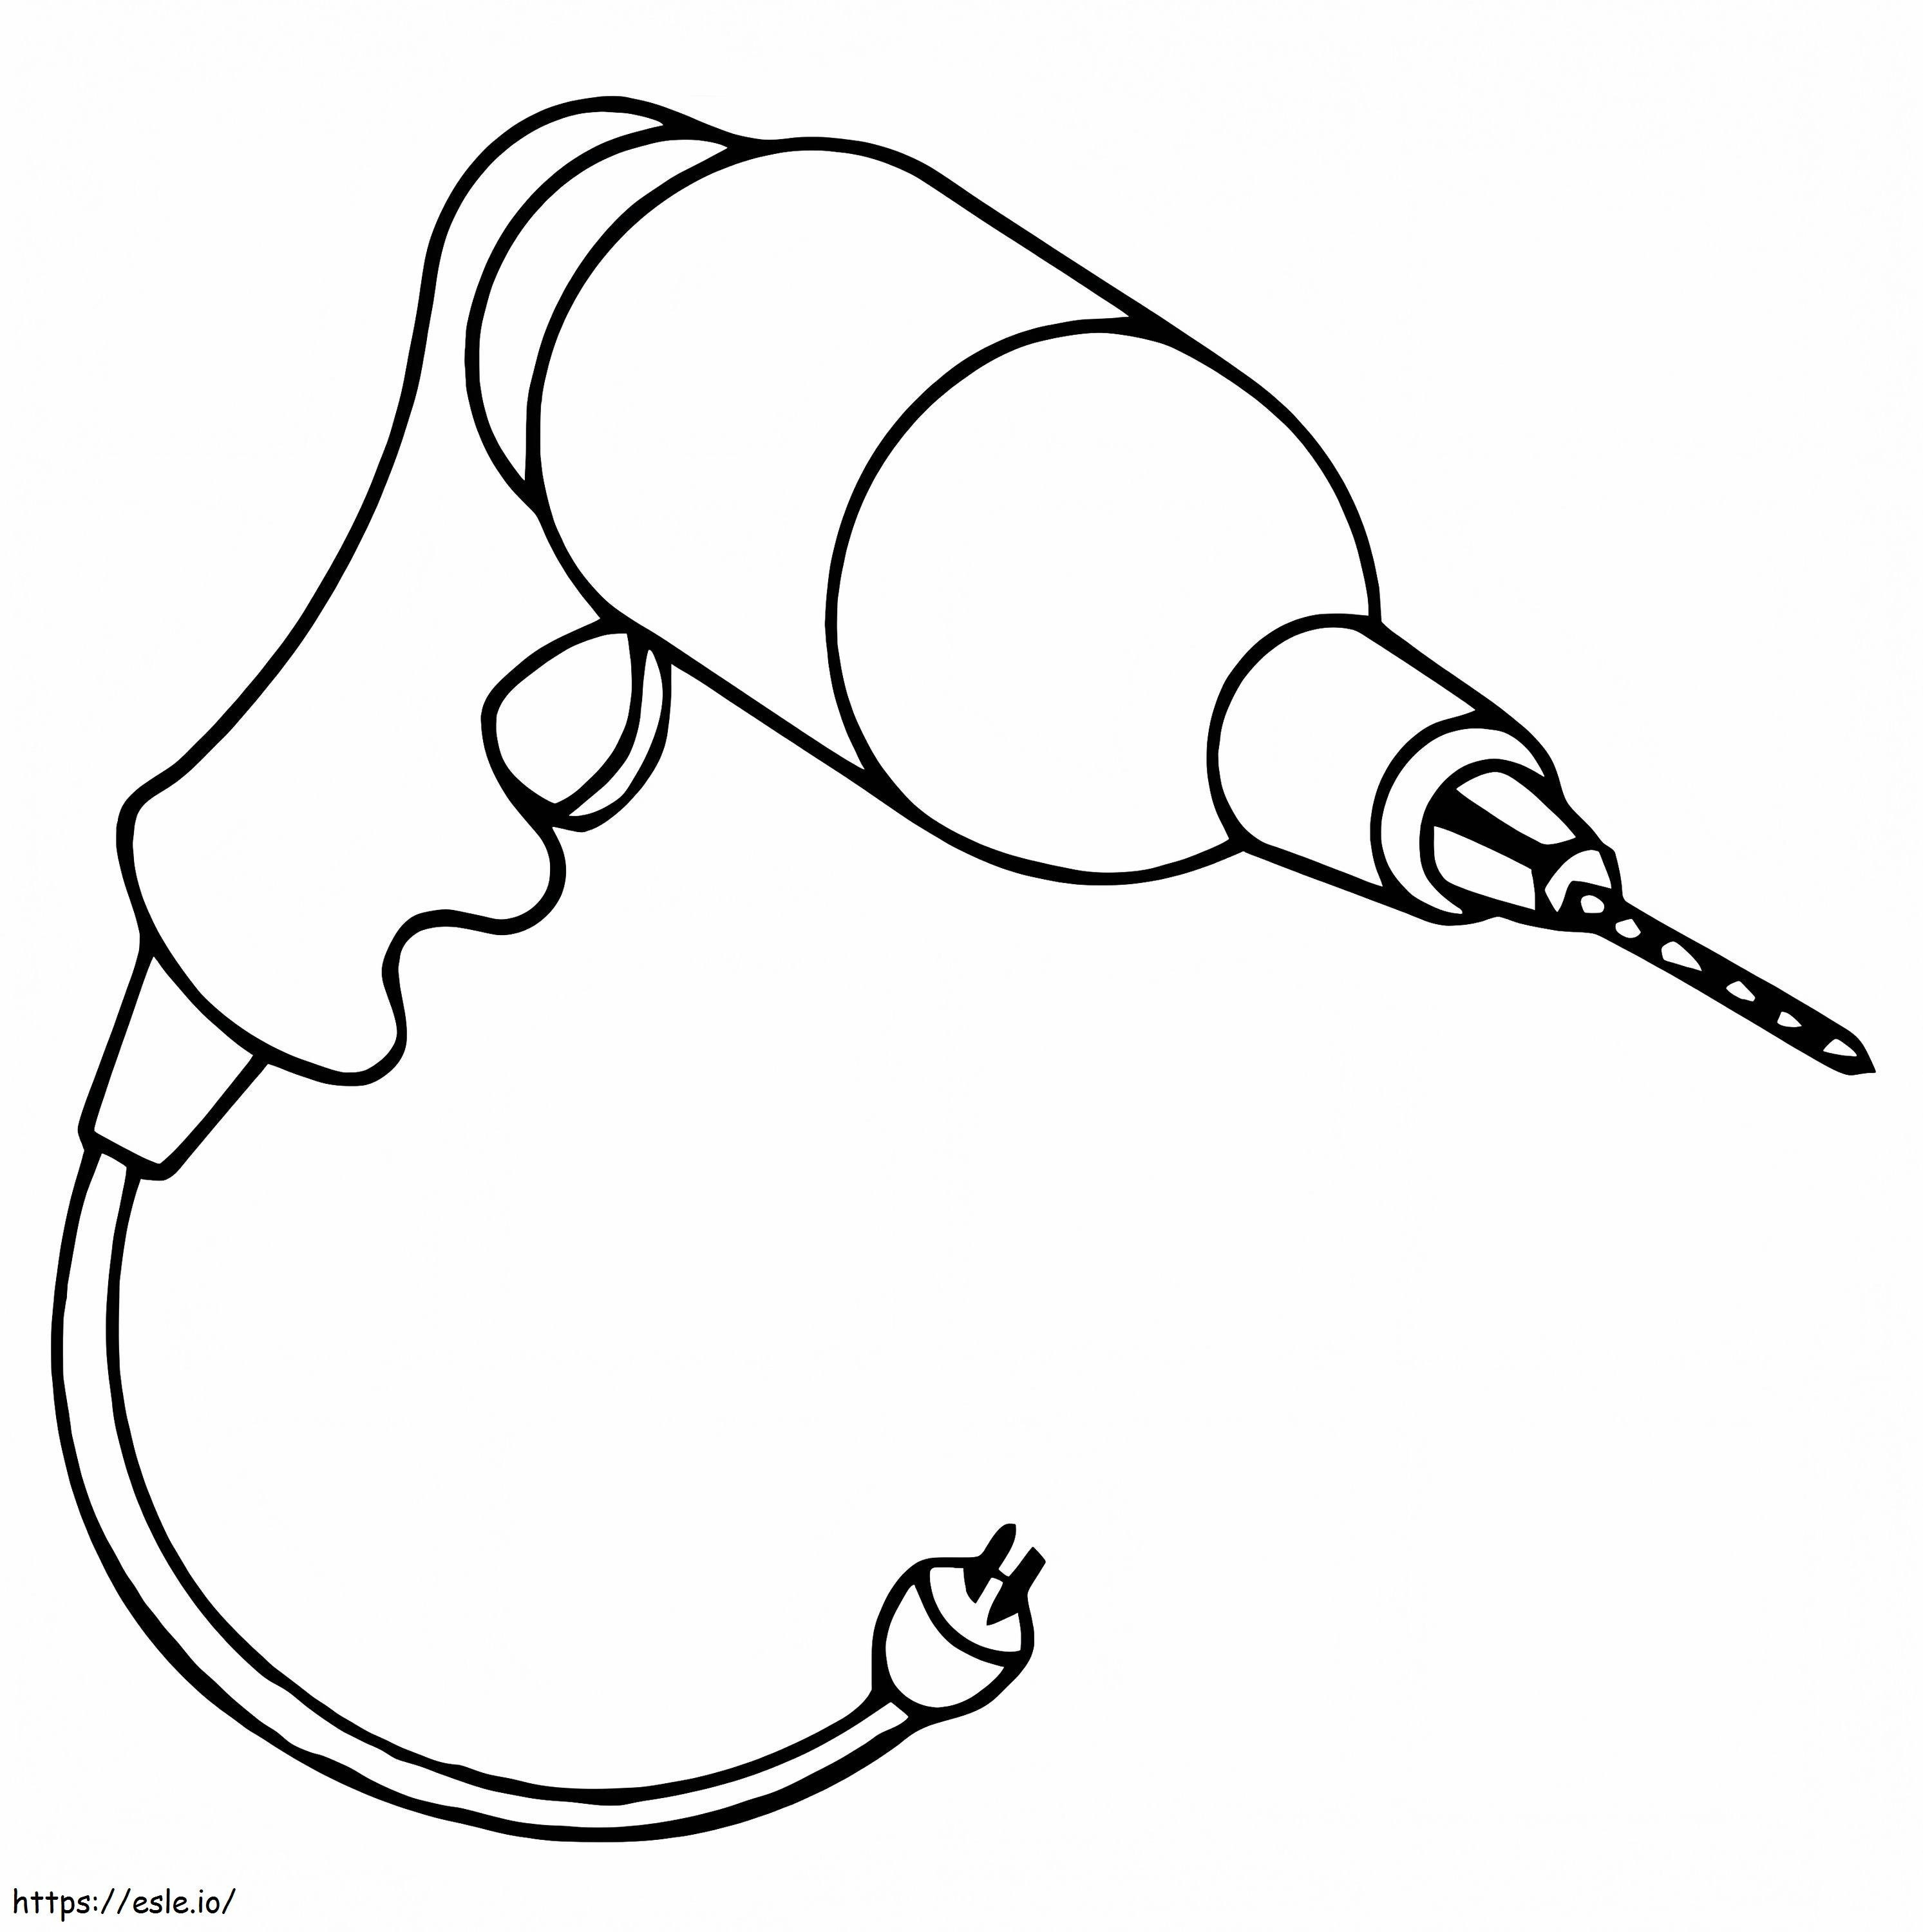 Power Drill coloring page